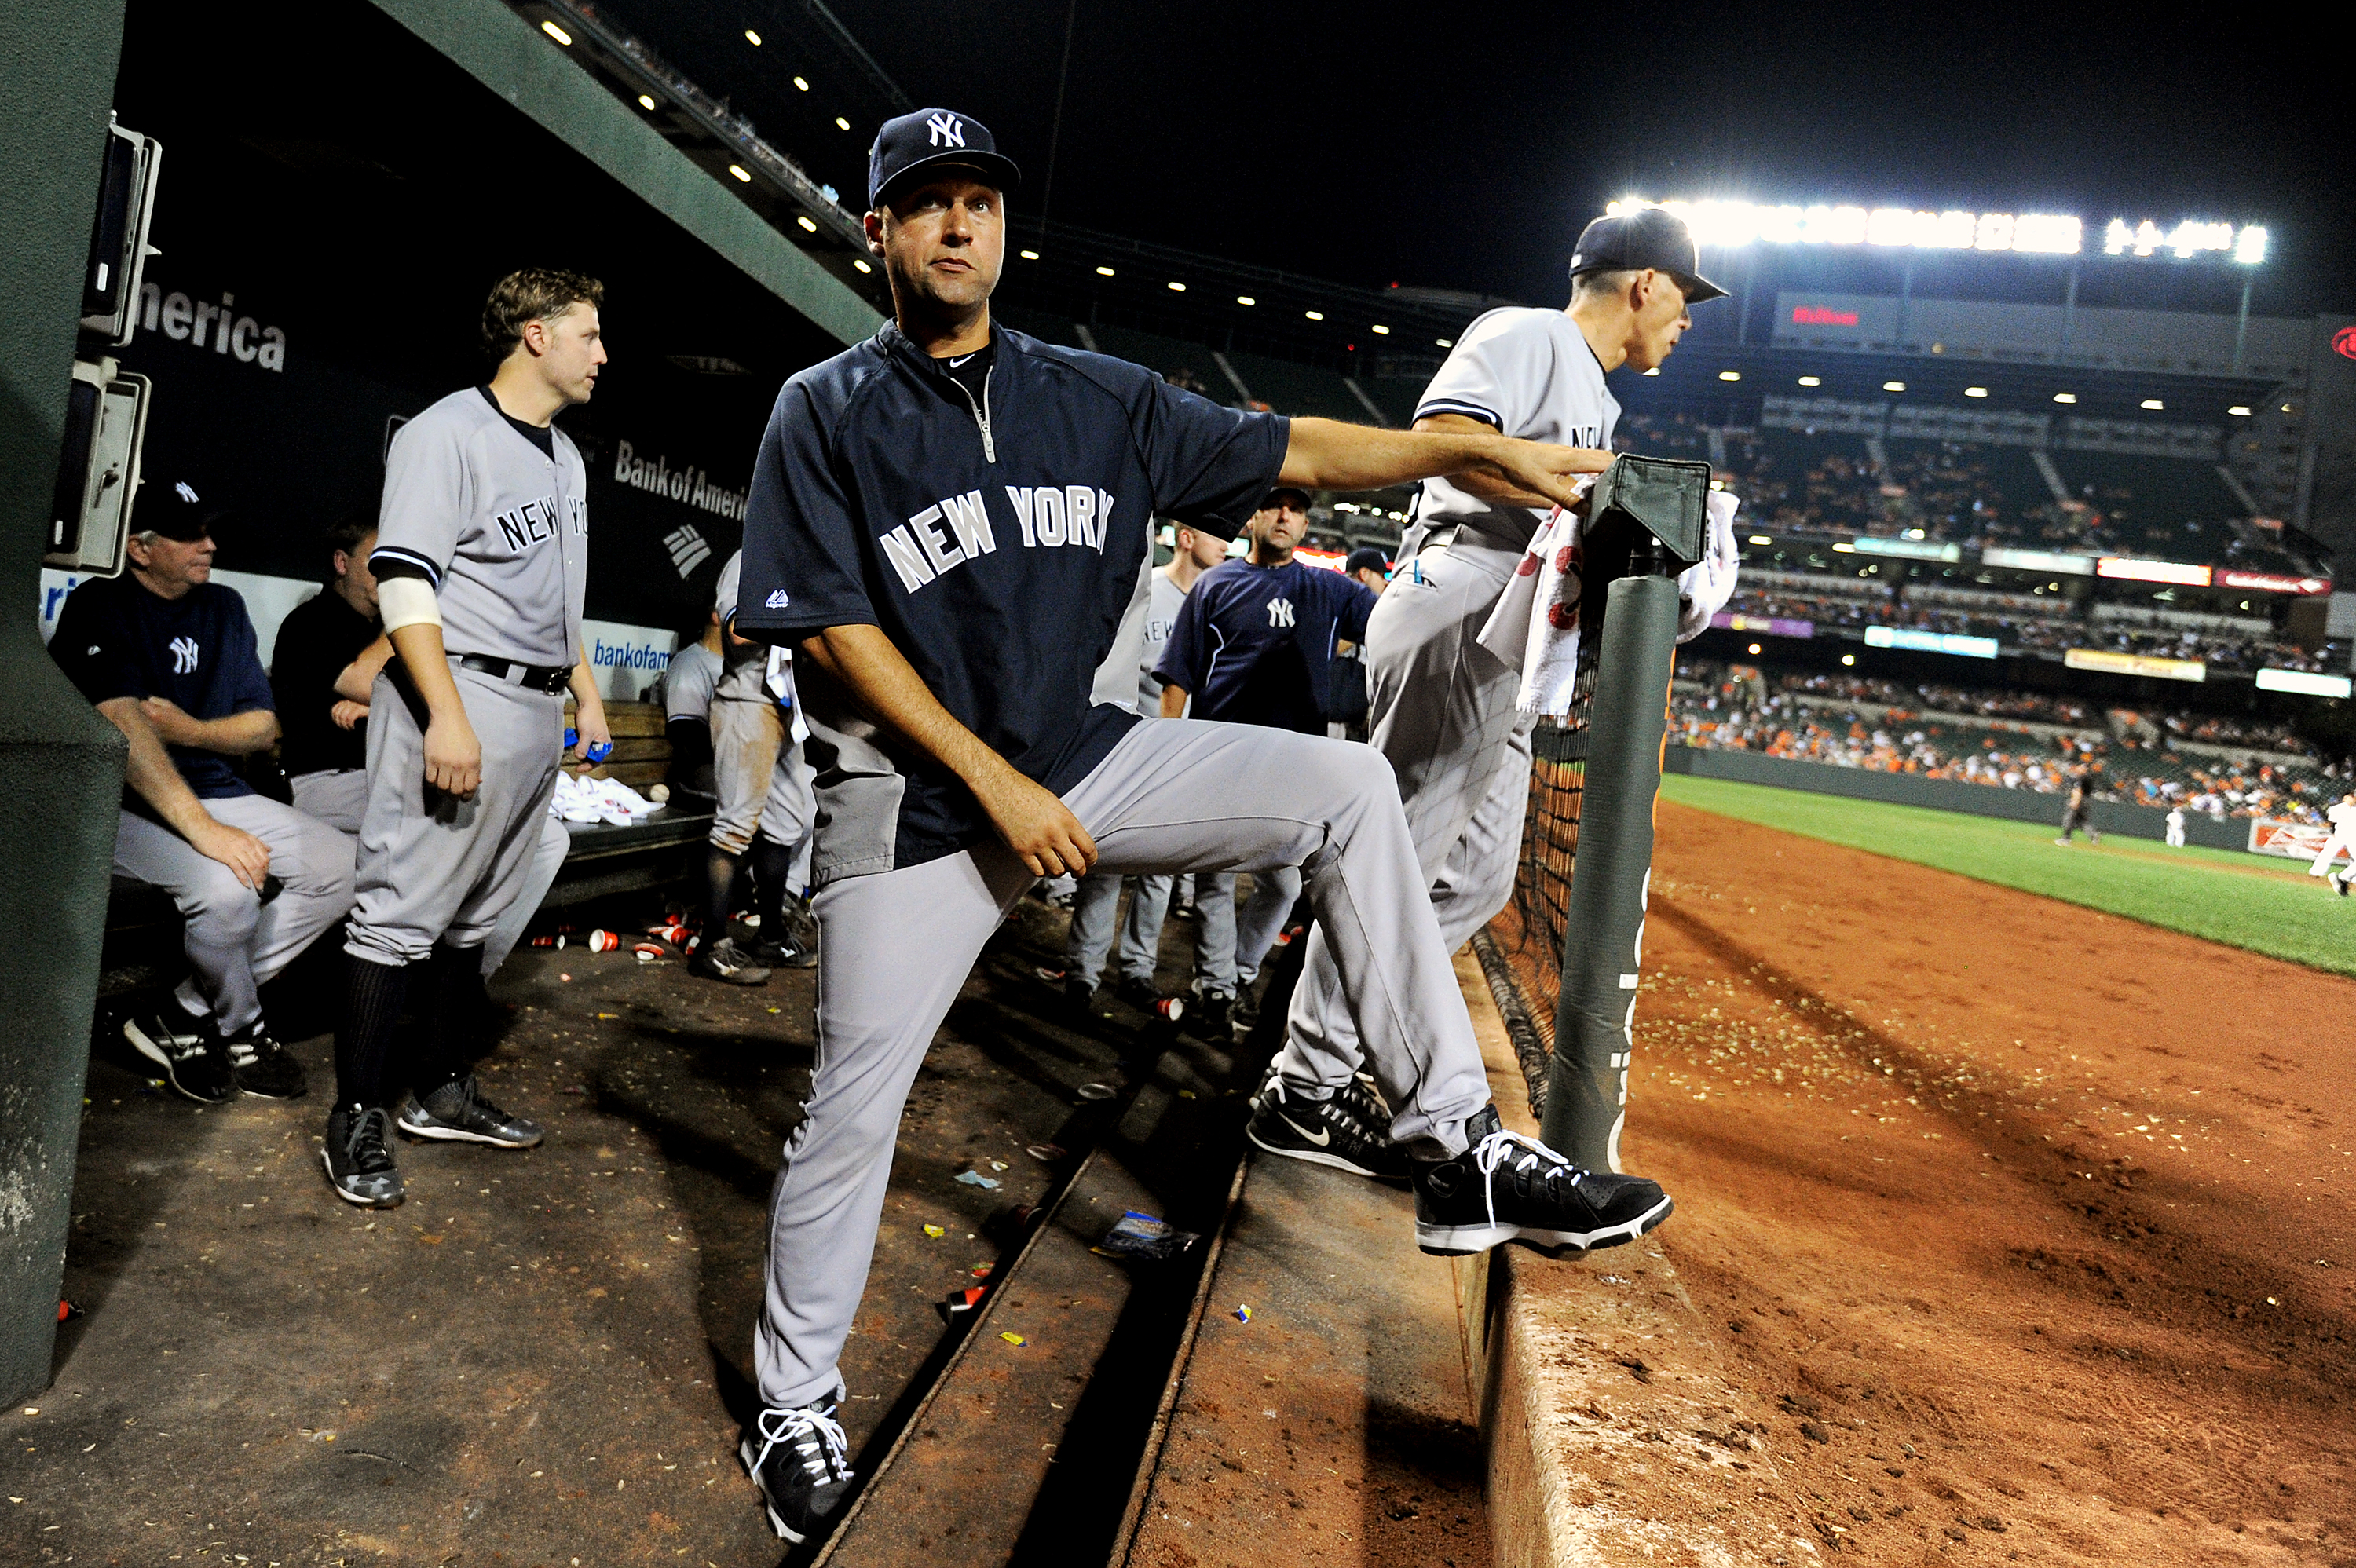 Derek Jeter to retire at end of 2014 season - MLB Daily Dish